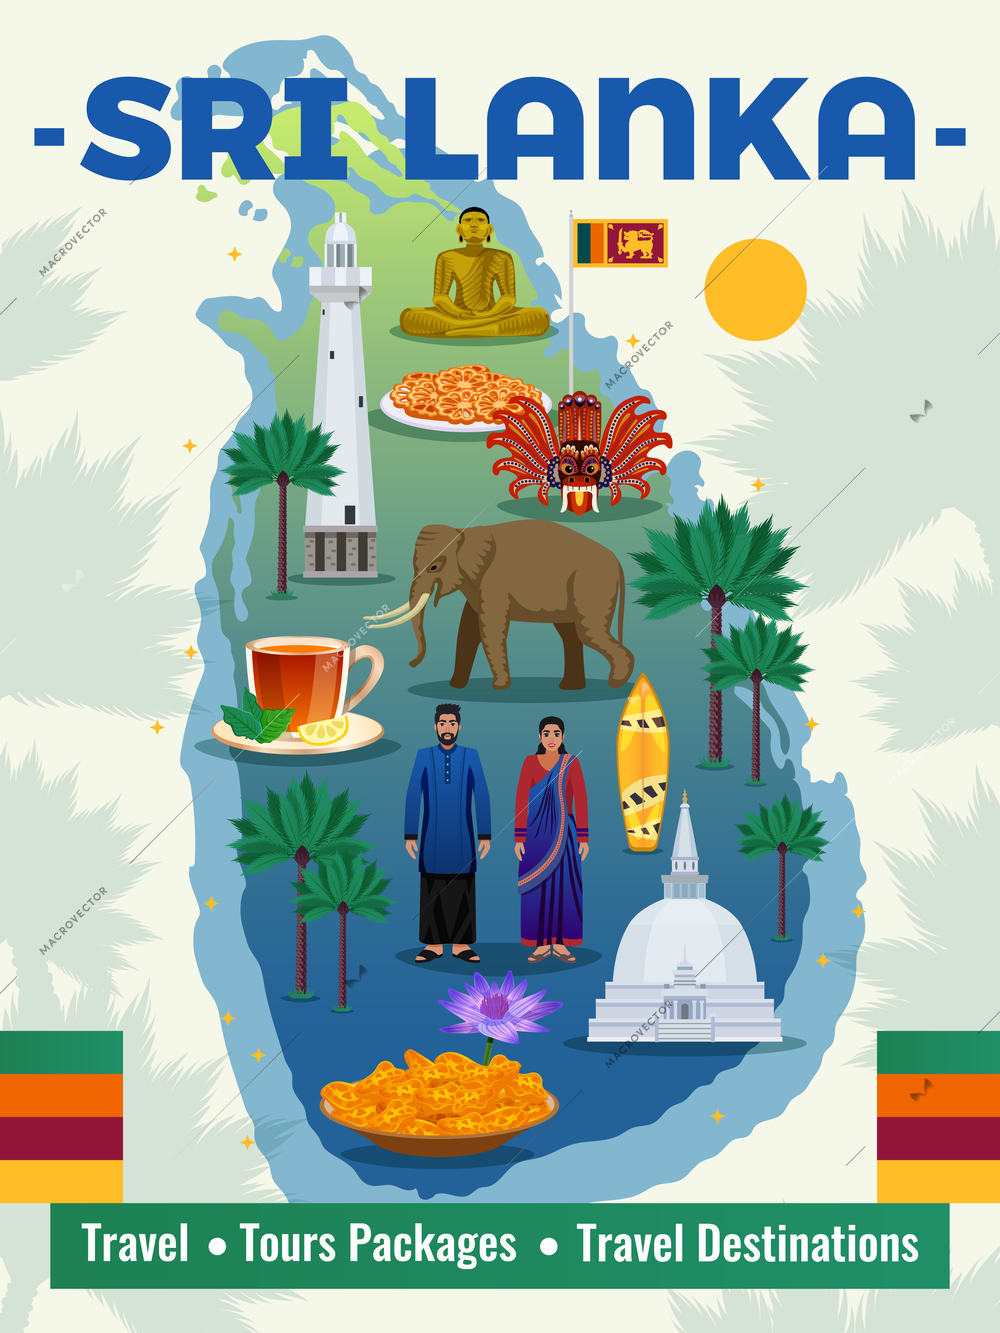 Sri Lanka tours packages travel agency guide advertising poster with map landmarks sightseeing monuments tourists attractions vector illustration